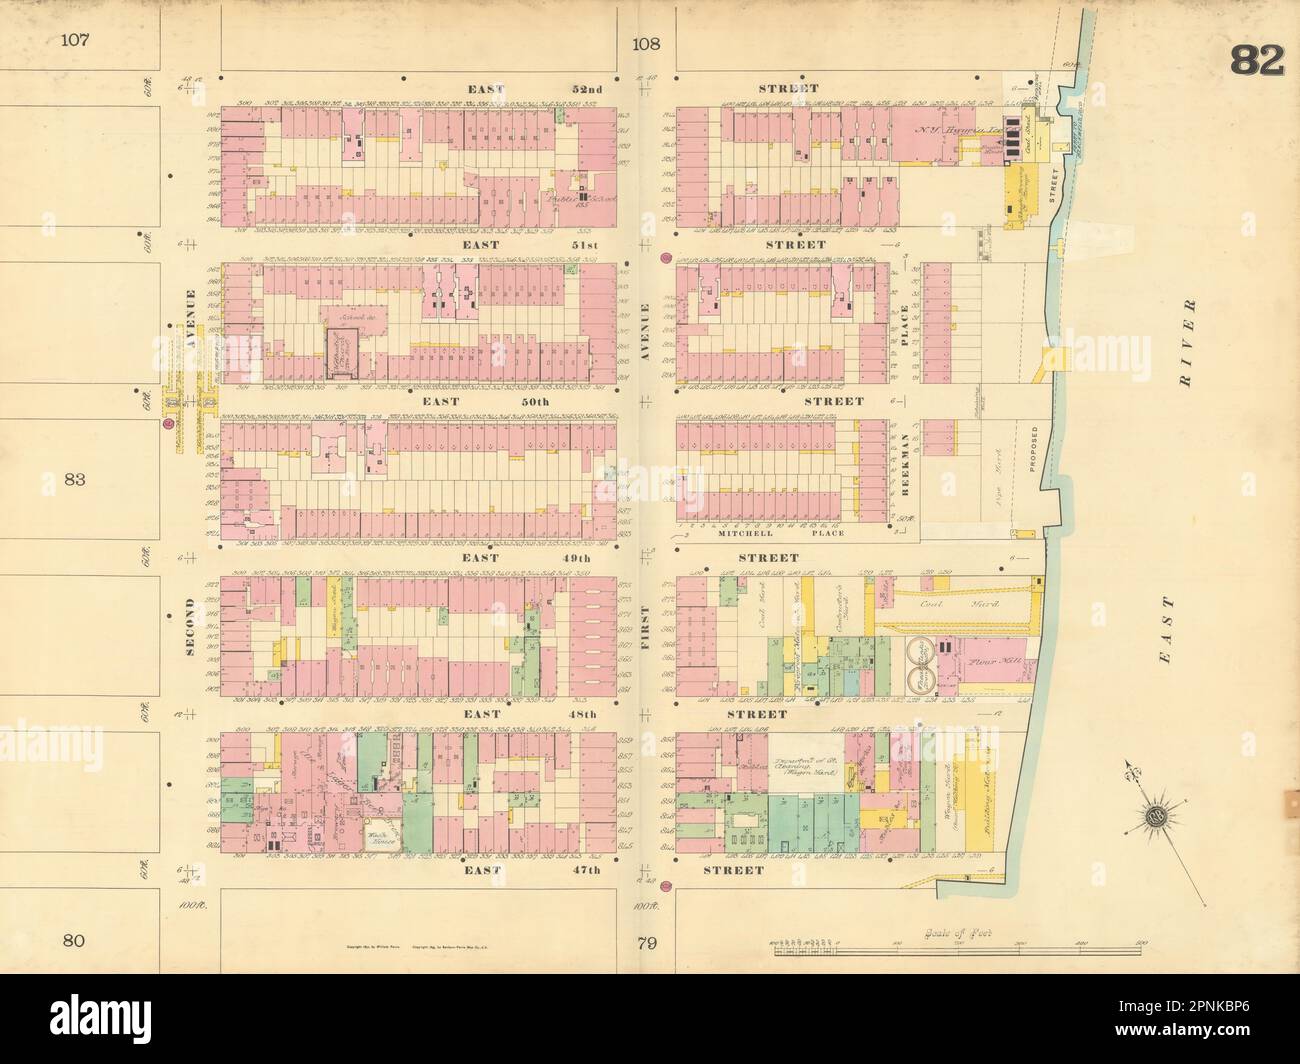 Sanborn NYC #82 Manhattan Midtown East Turtle Bay. UN HQ site 1899 old map Stock Photo